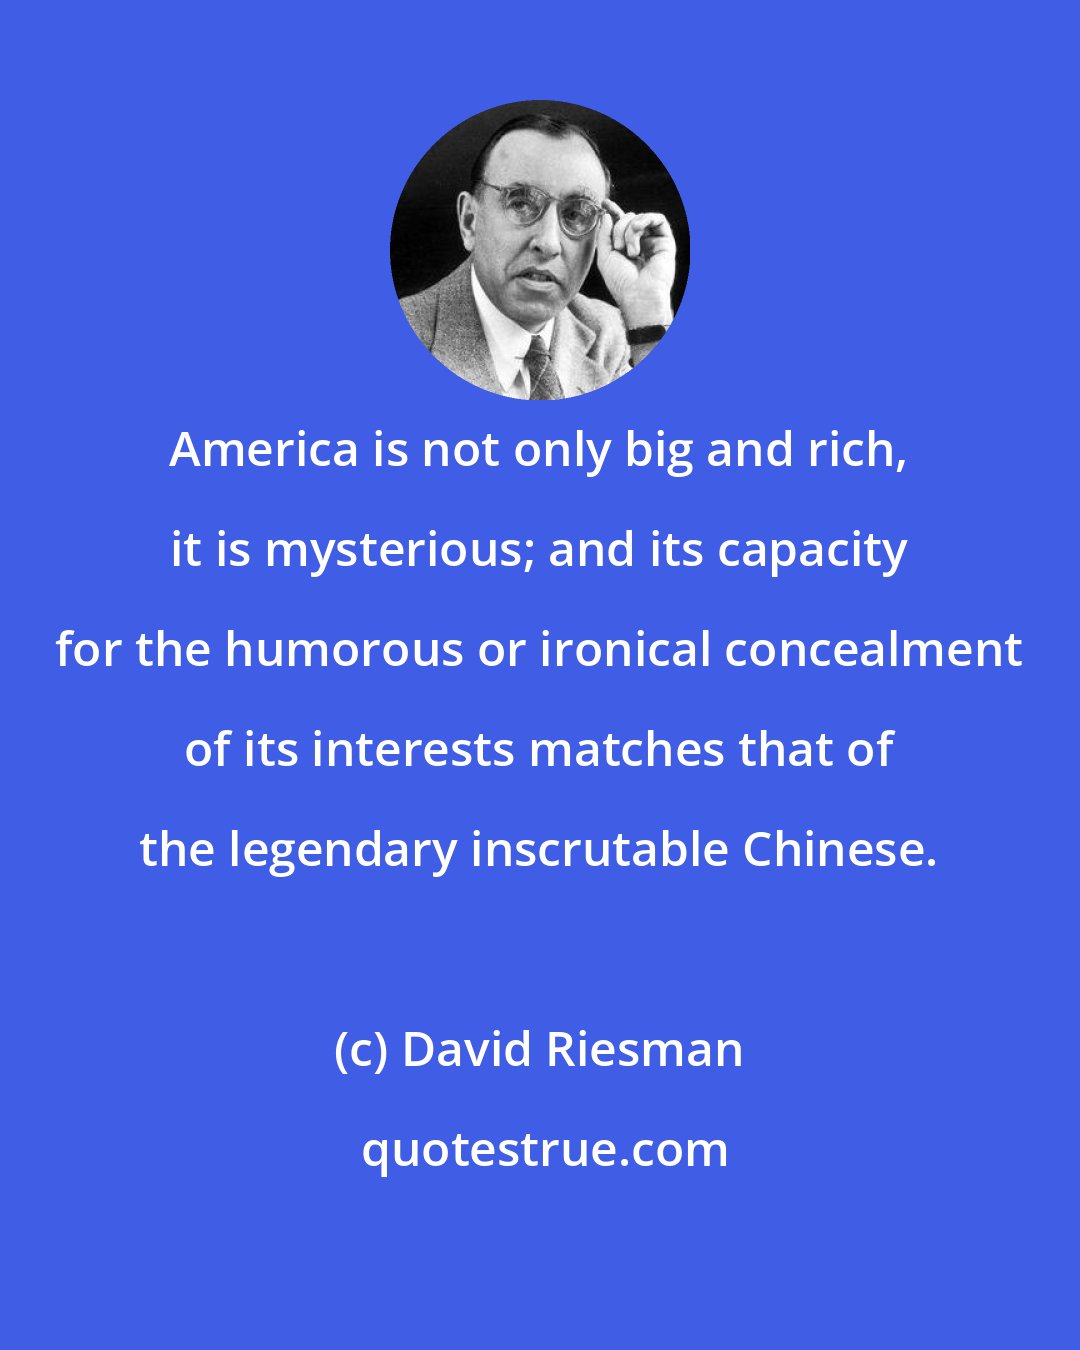 David Riesman: America is not only big and rich, it is mysterious; and its capacity for the humorous or ironical concealment of its interests matches that of the legendary inscrutable Chinese.